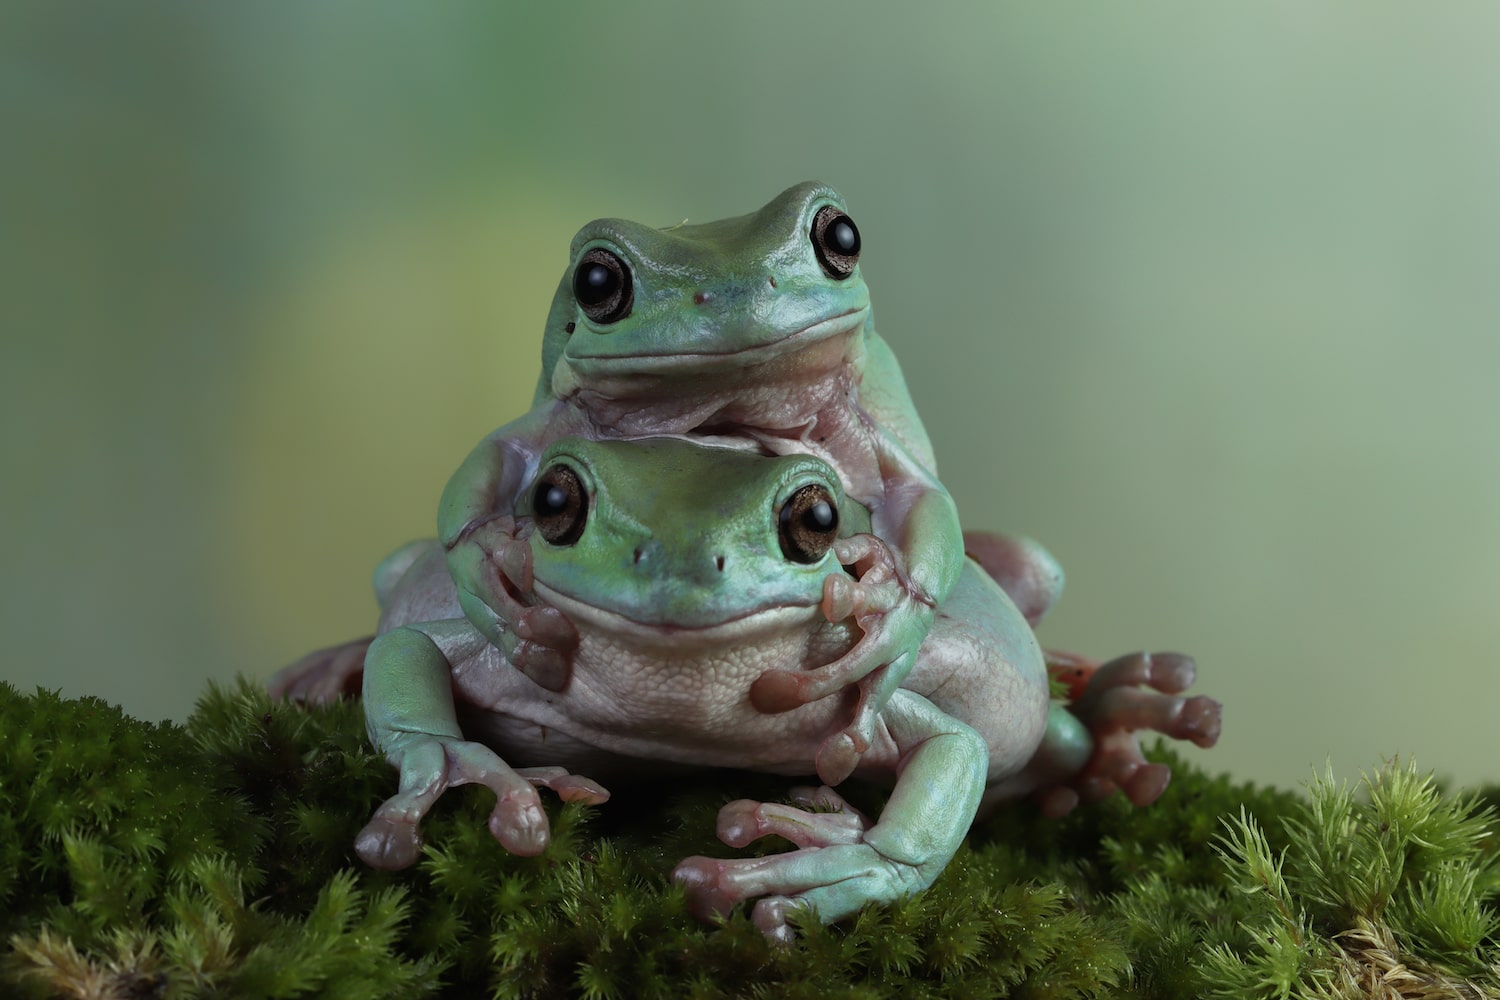 Make It Easier To Be Green. Show Frogs Some Love.